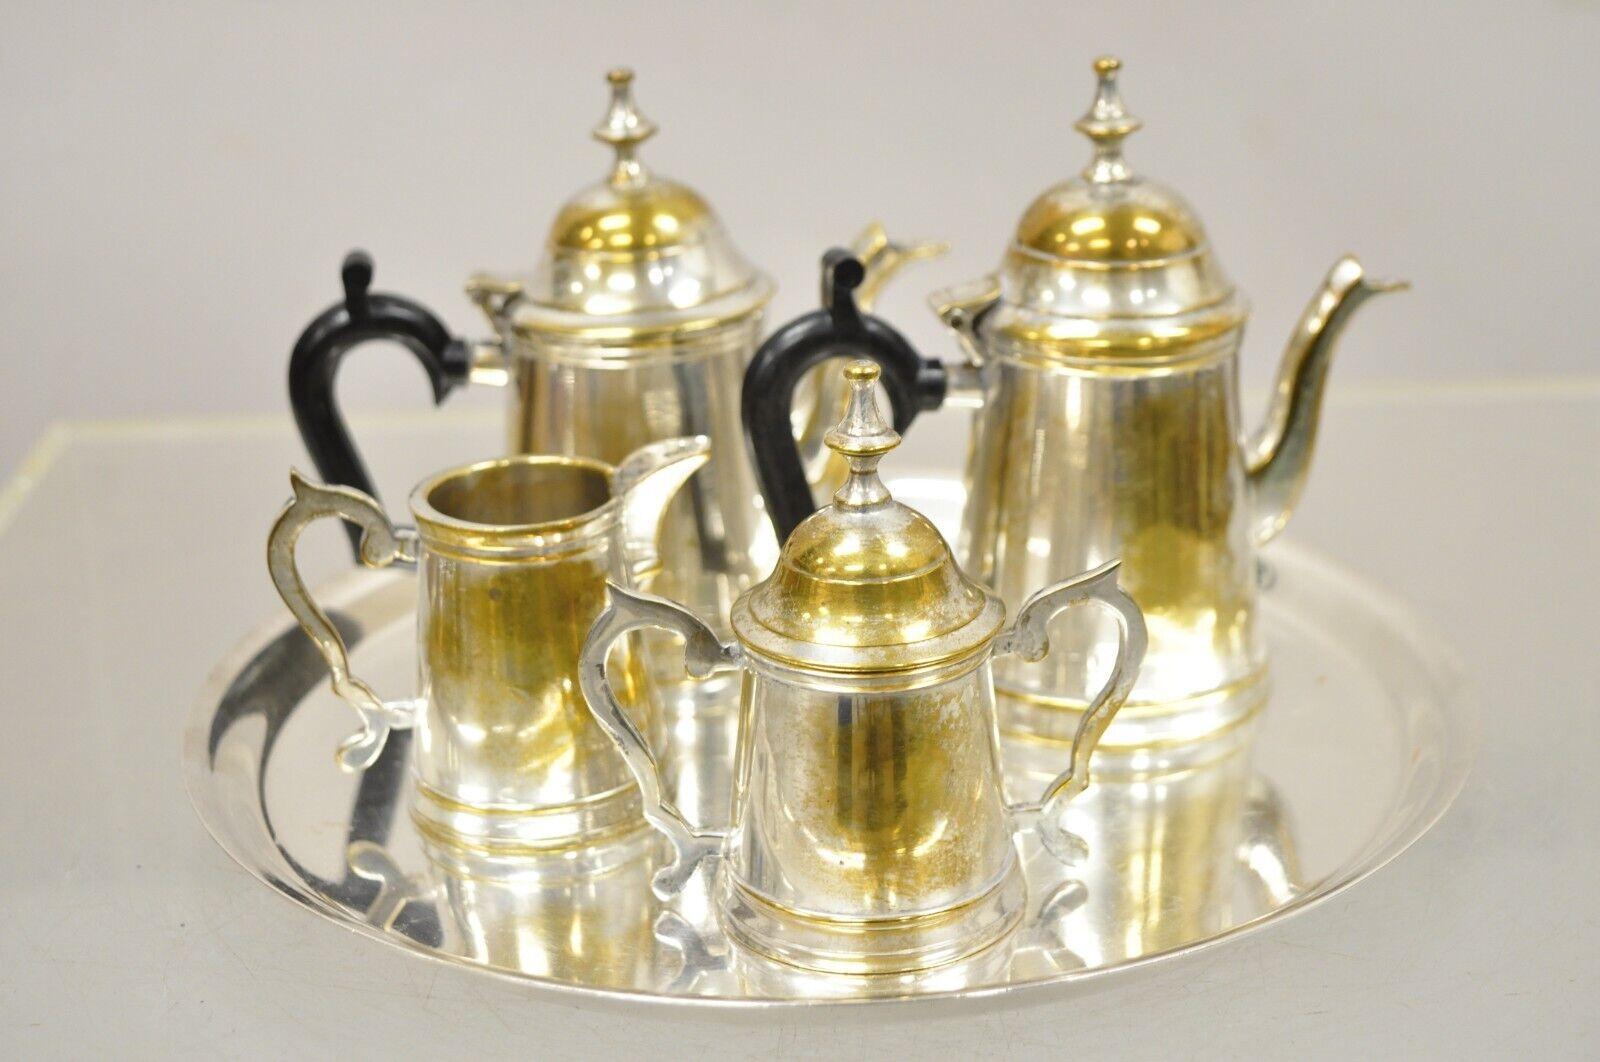 Vintage Federal Style Small Indian Silver Plated Coffee Tea Set w/ Wilcox Tray. Item features a 5 piece set, serving pieces marked 